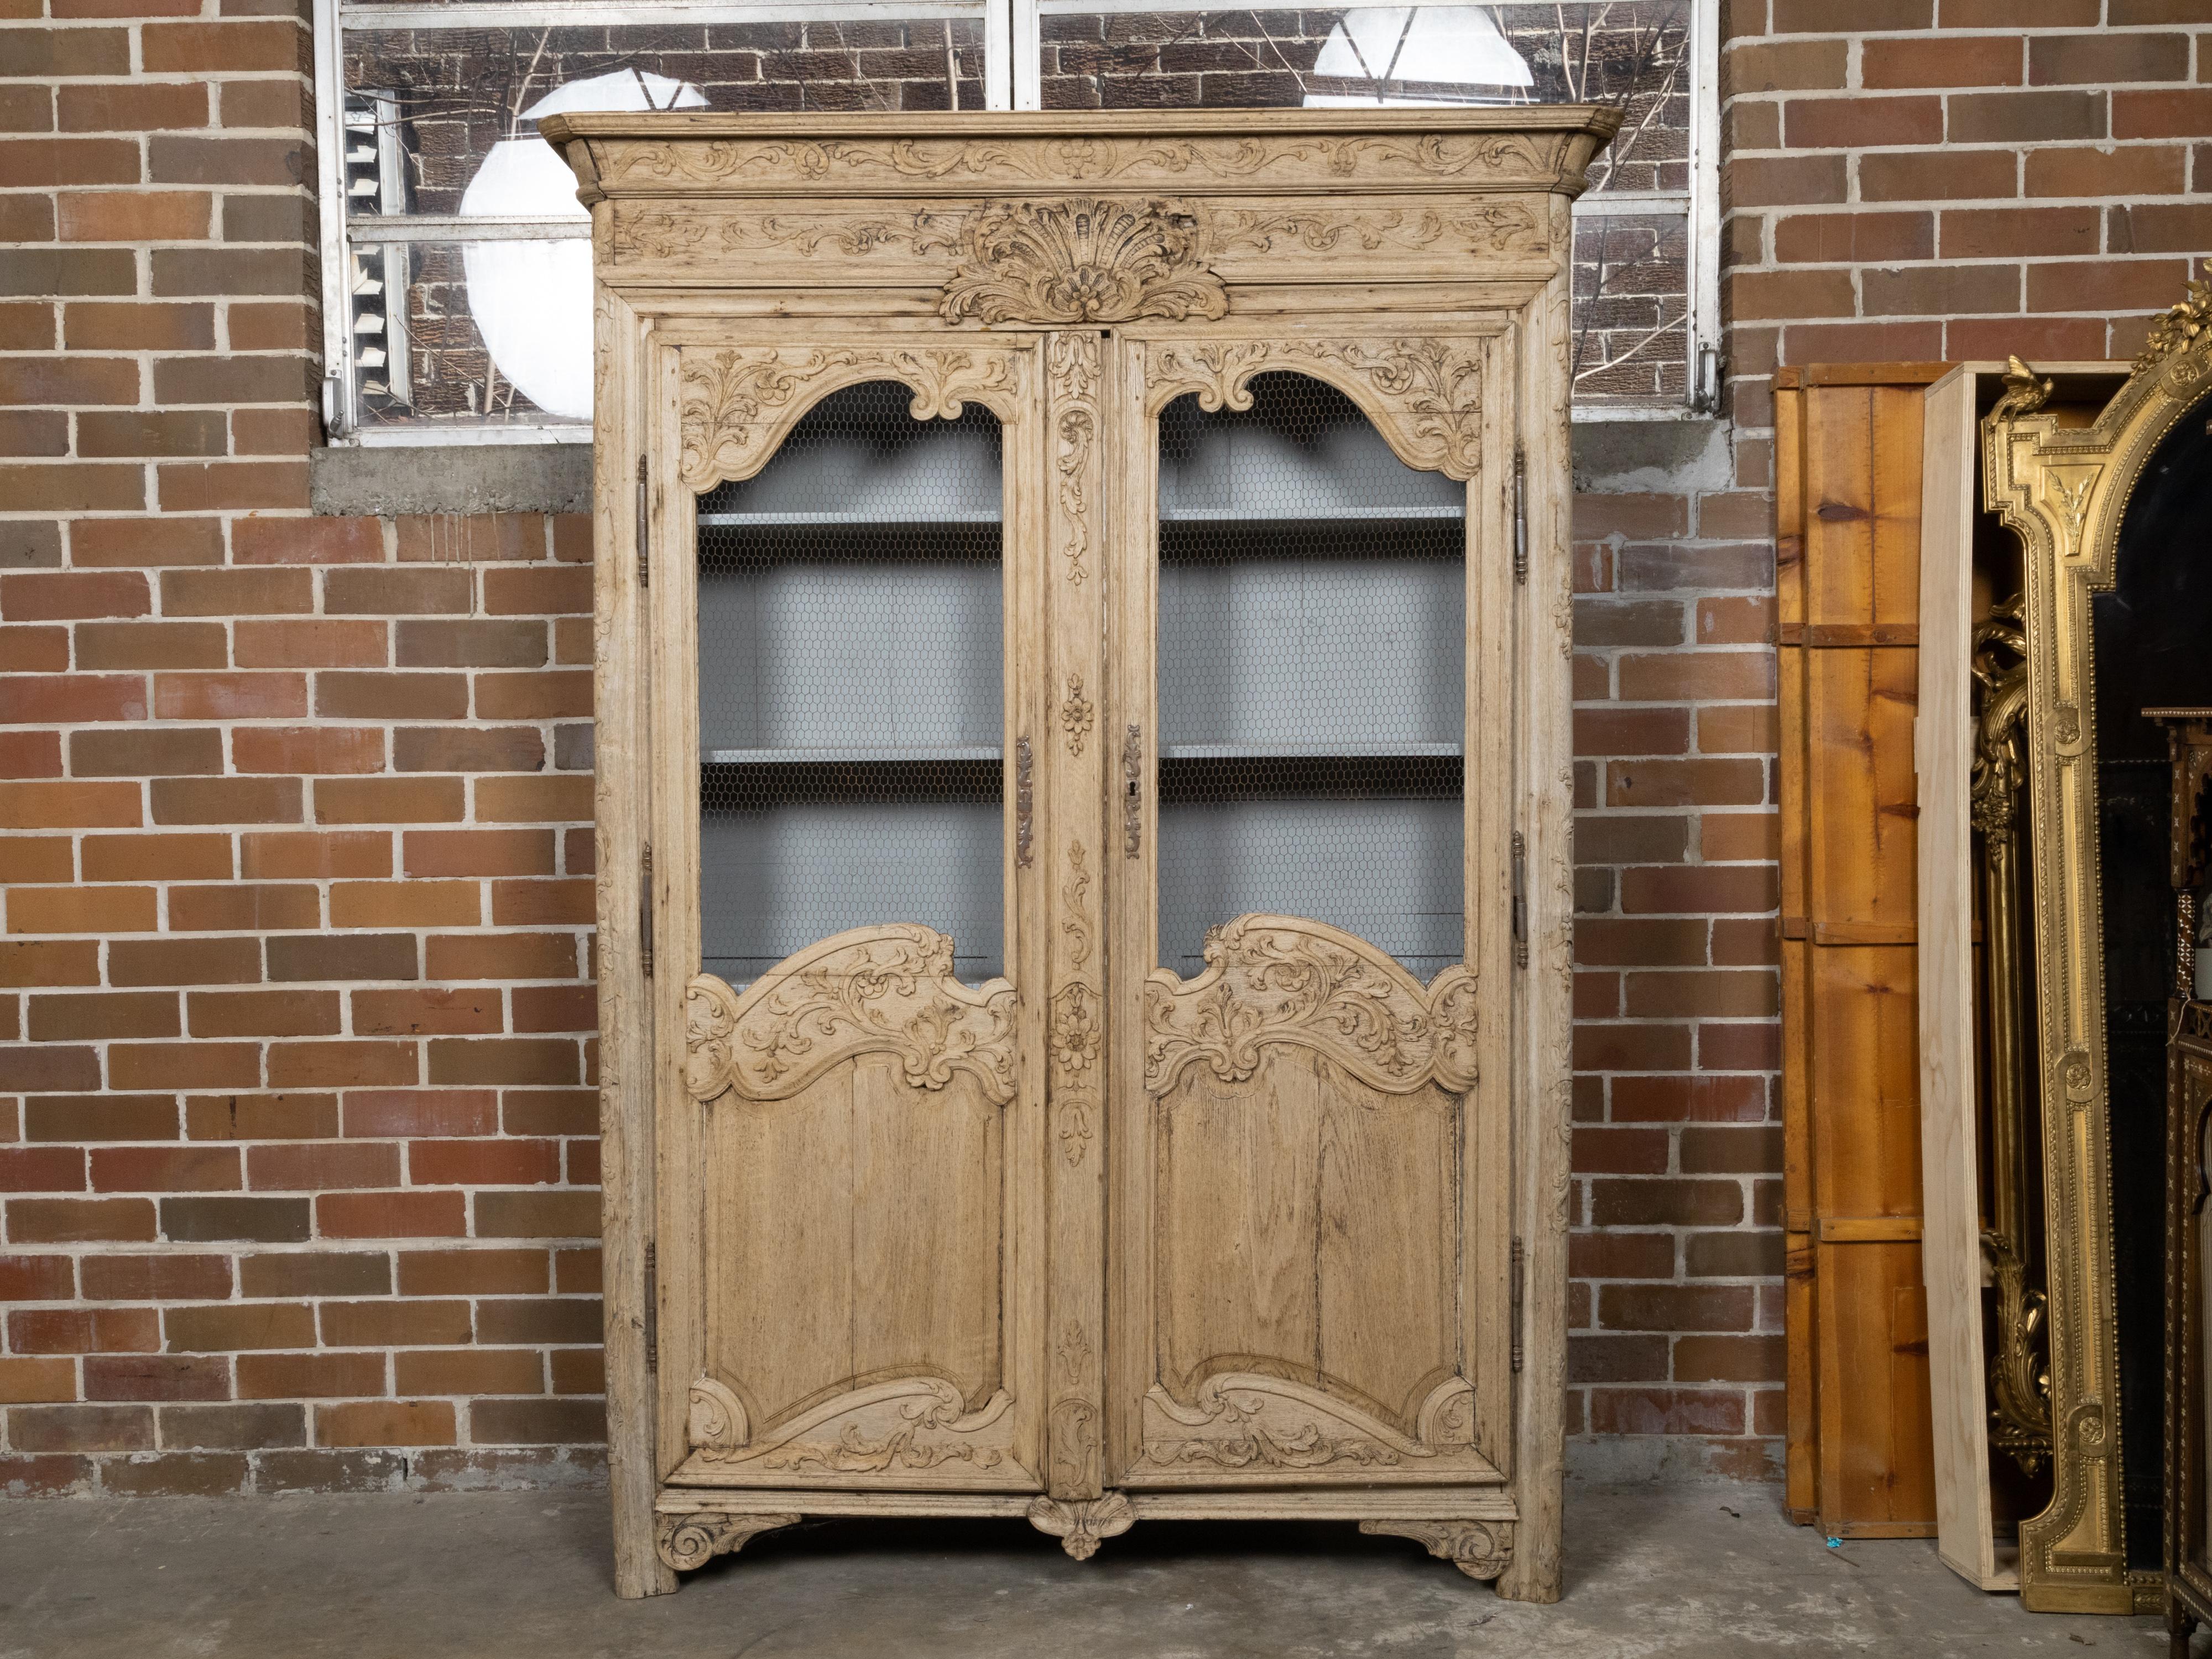 A Country French stripped wood bookcase from the 19th century with abundant carved scrolling décor, foliage and chicken wire doors. This 19th-century Country French bookcase is a magnificent piece, beautifully crafted with stripped wood that